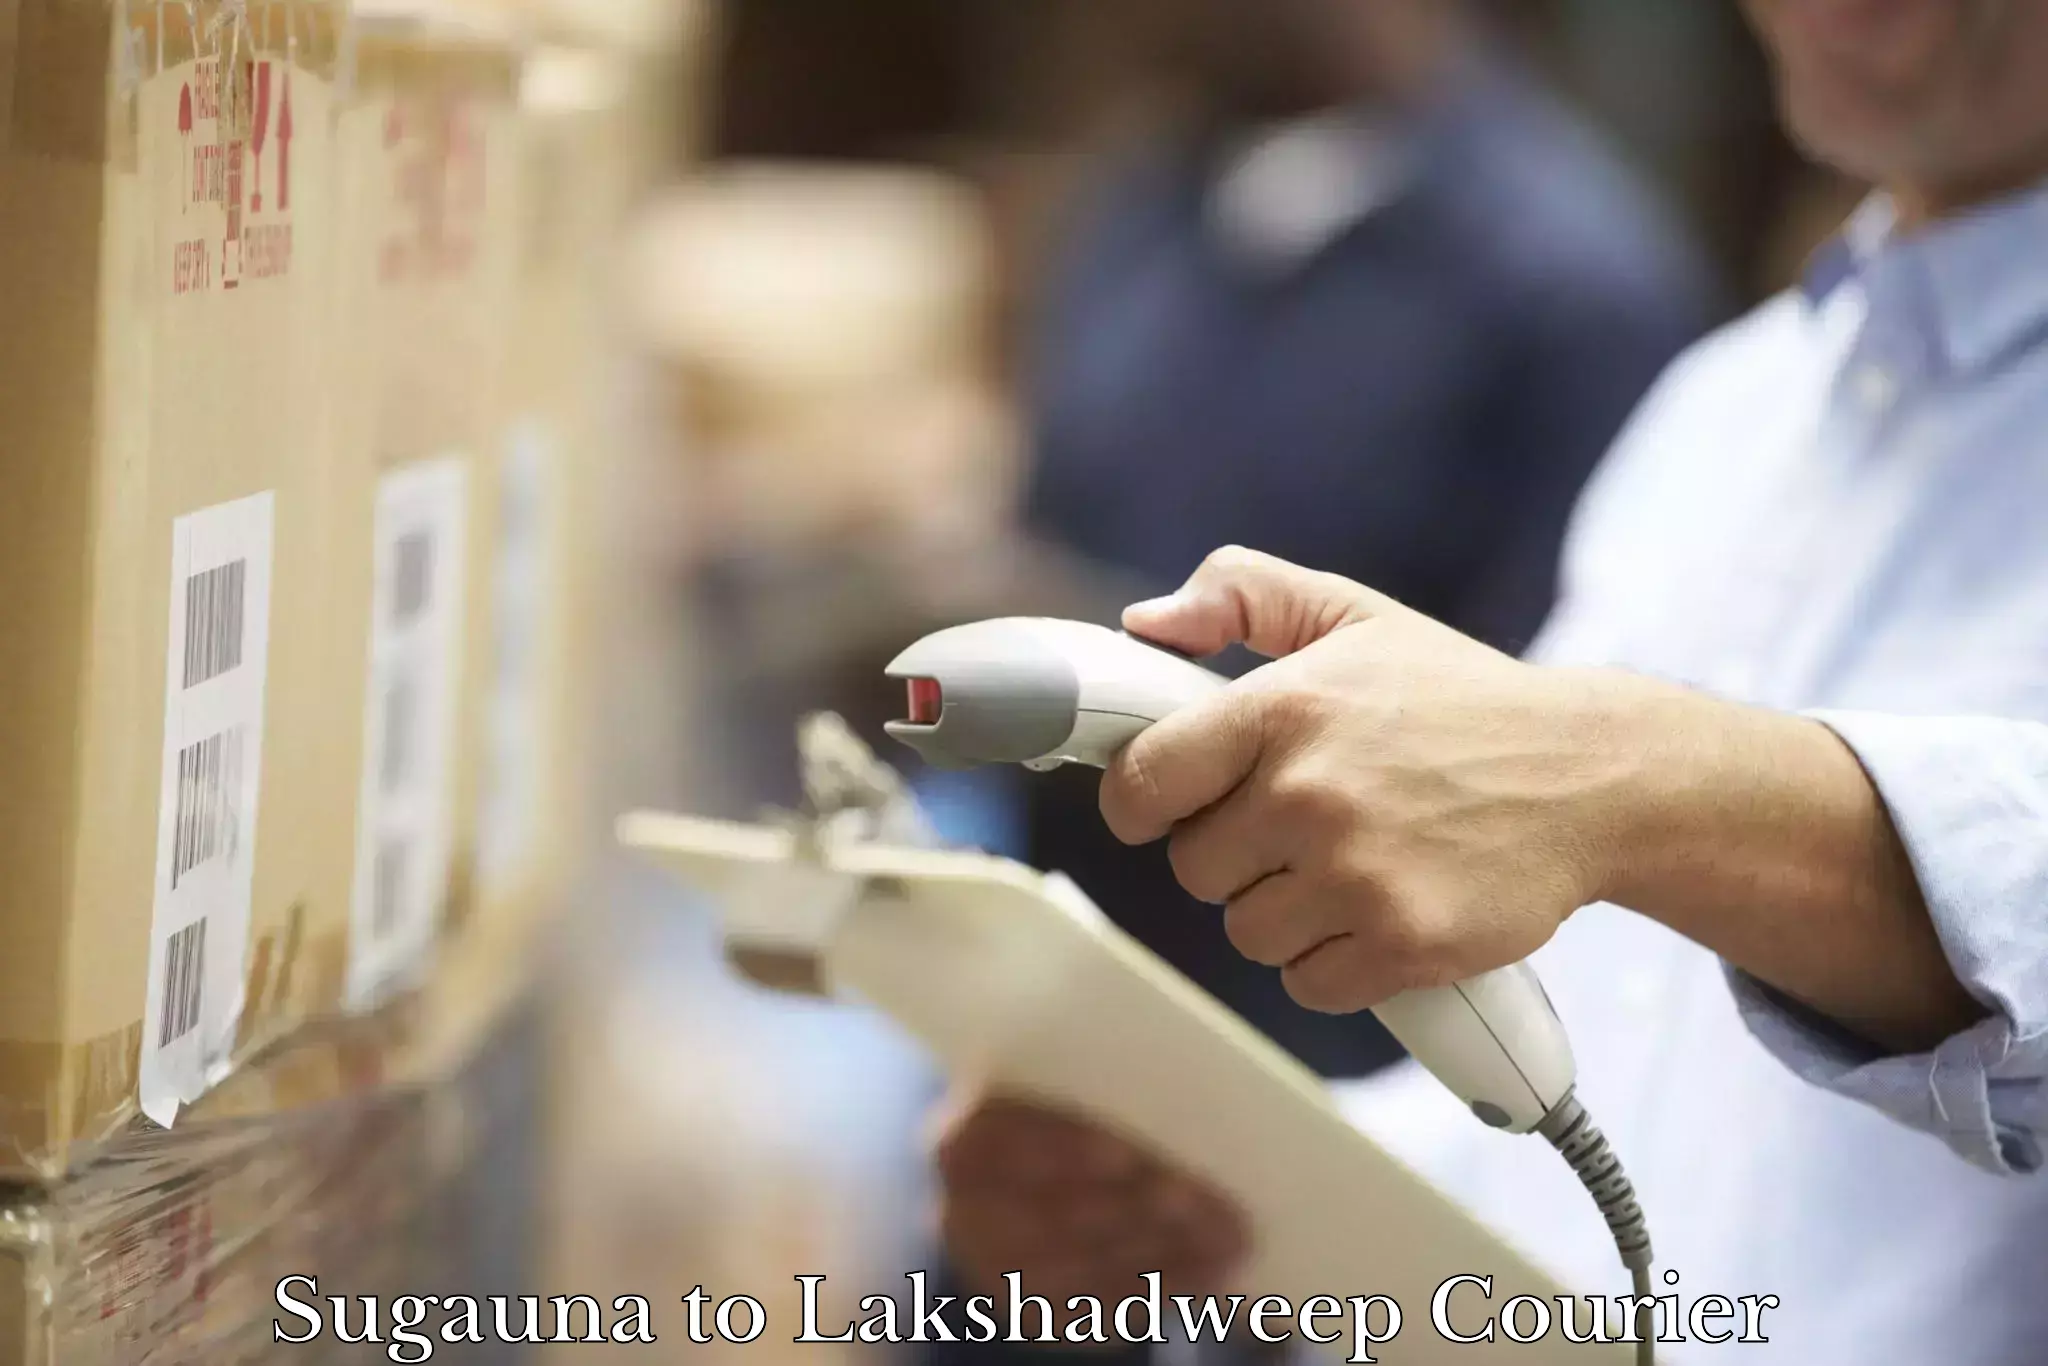 On-call courier service Sugauna to Lakshadweep